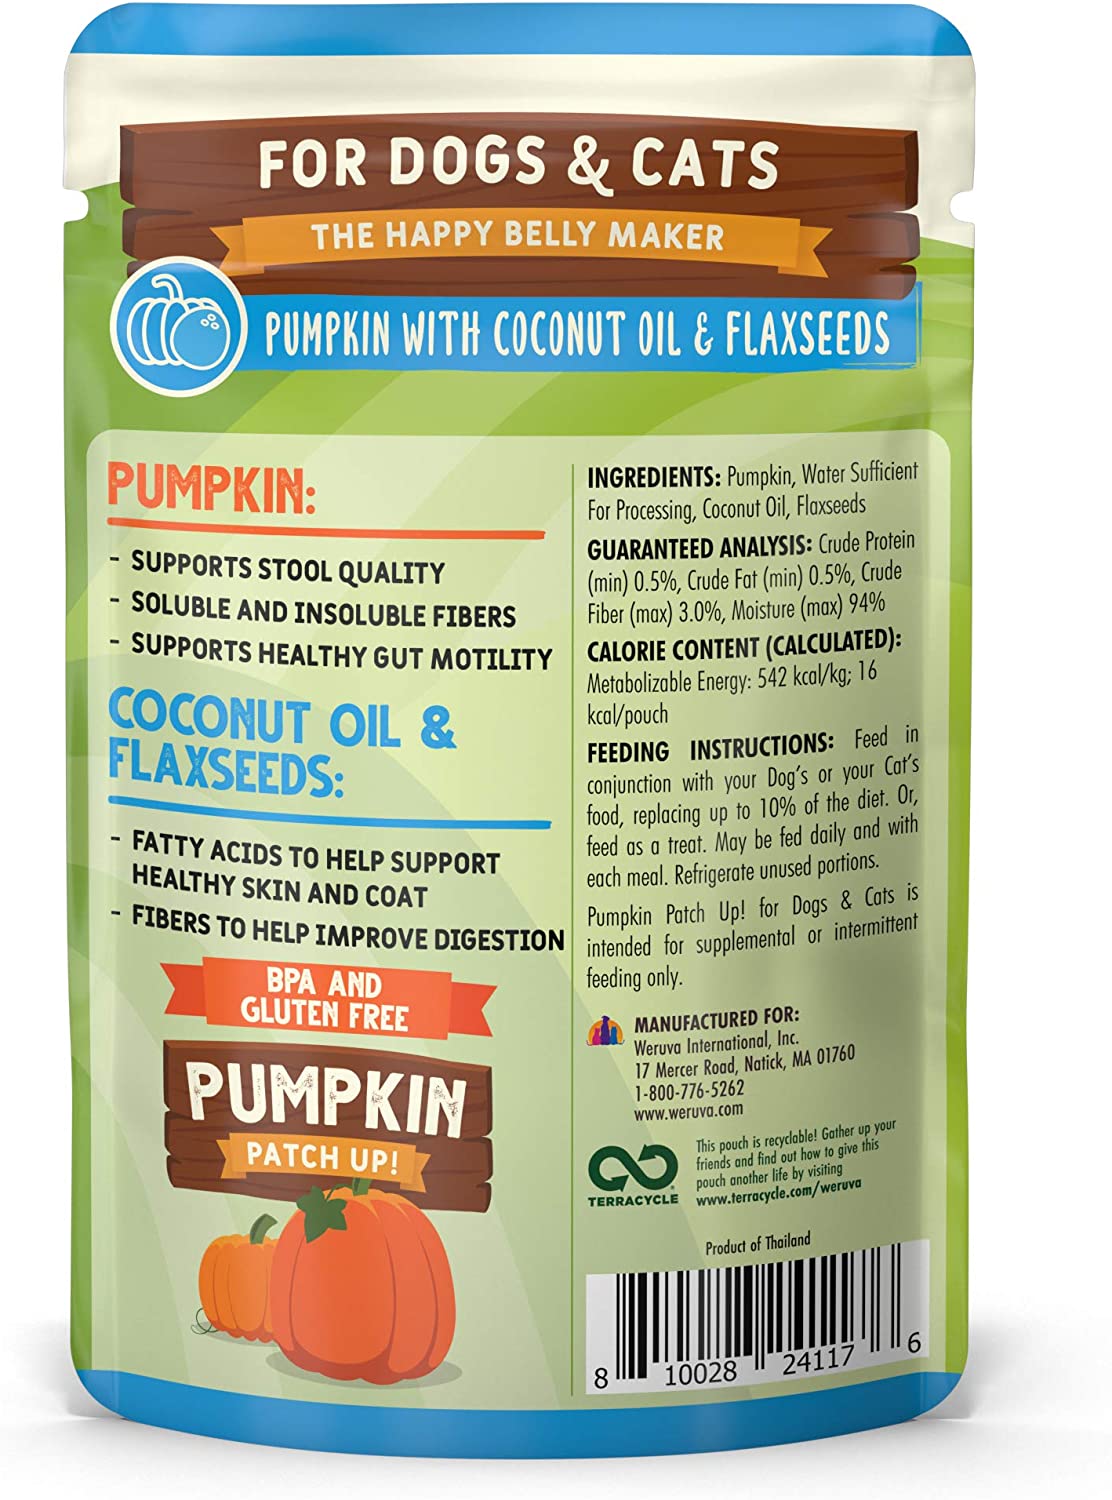 Weruva Pumpkin Patch Up Supplement with Coconut and Flax 1.05 oz Pouch